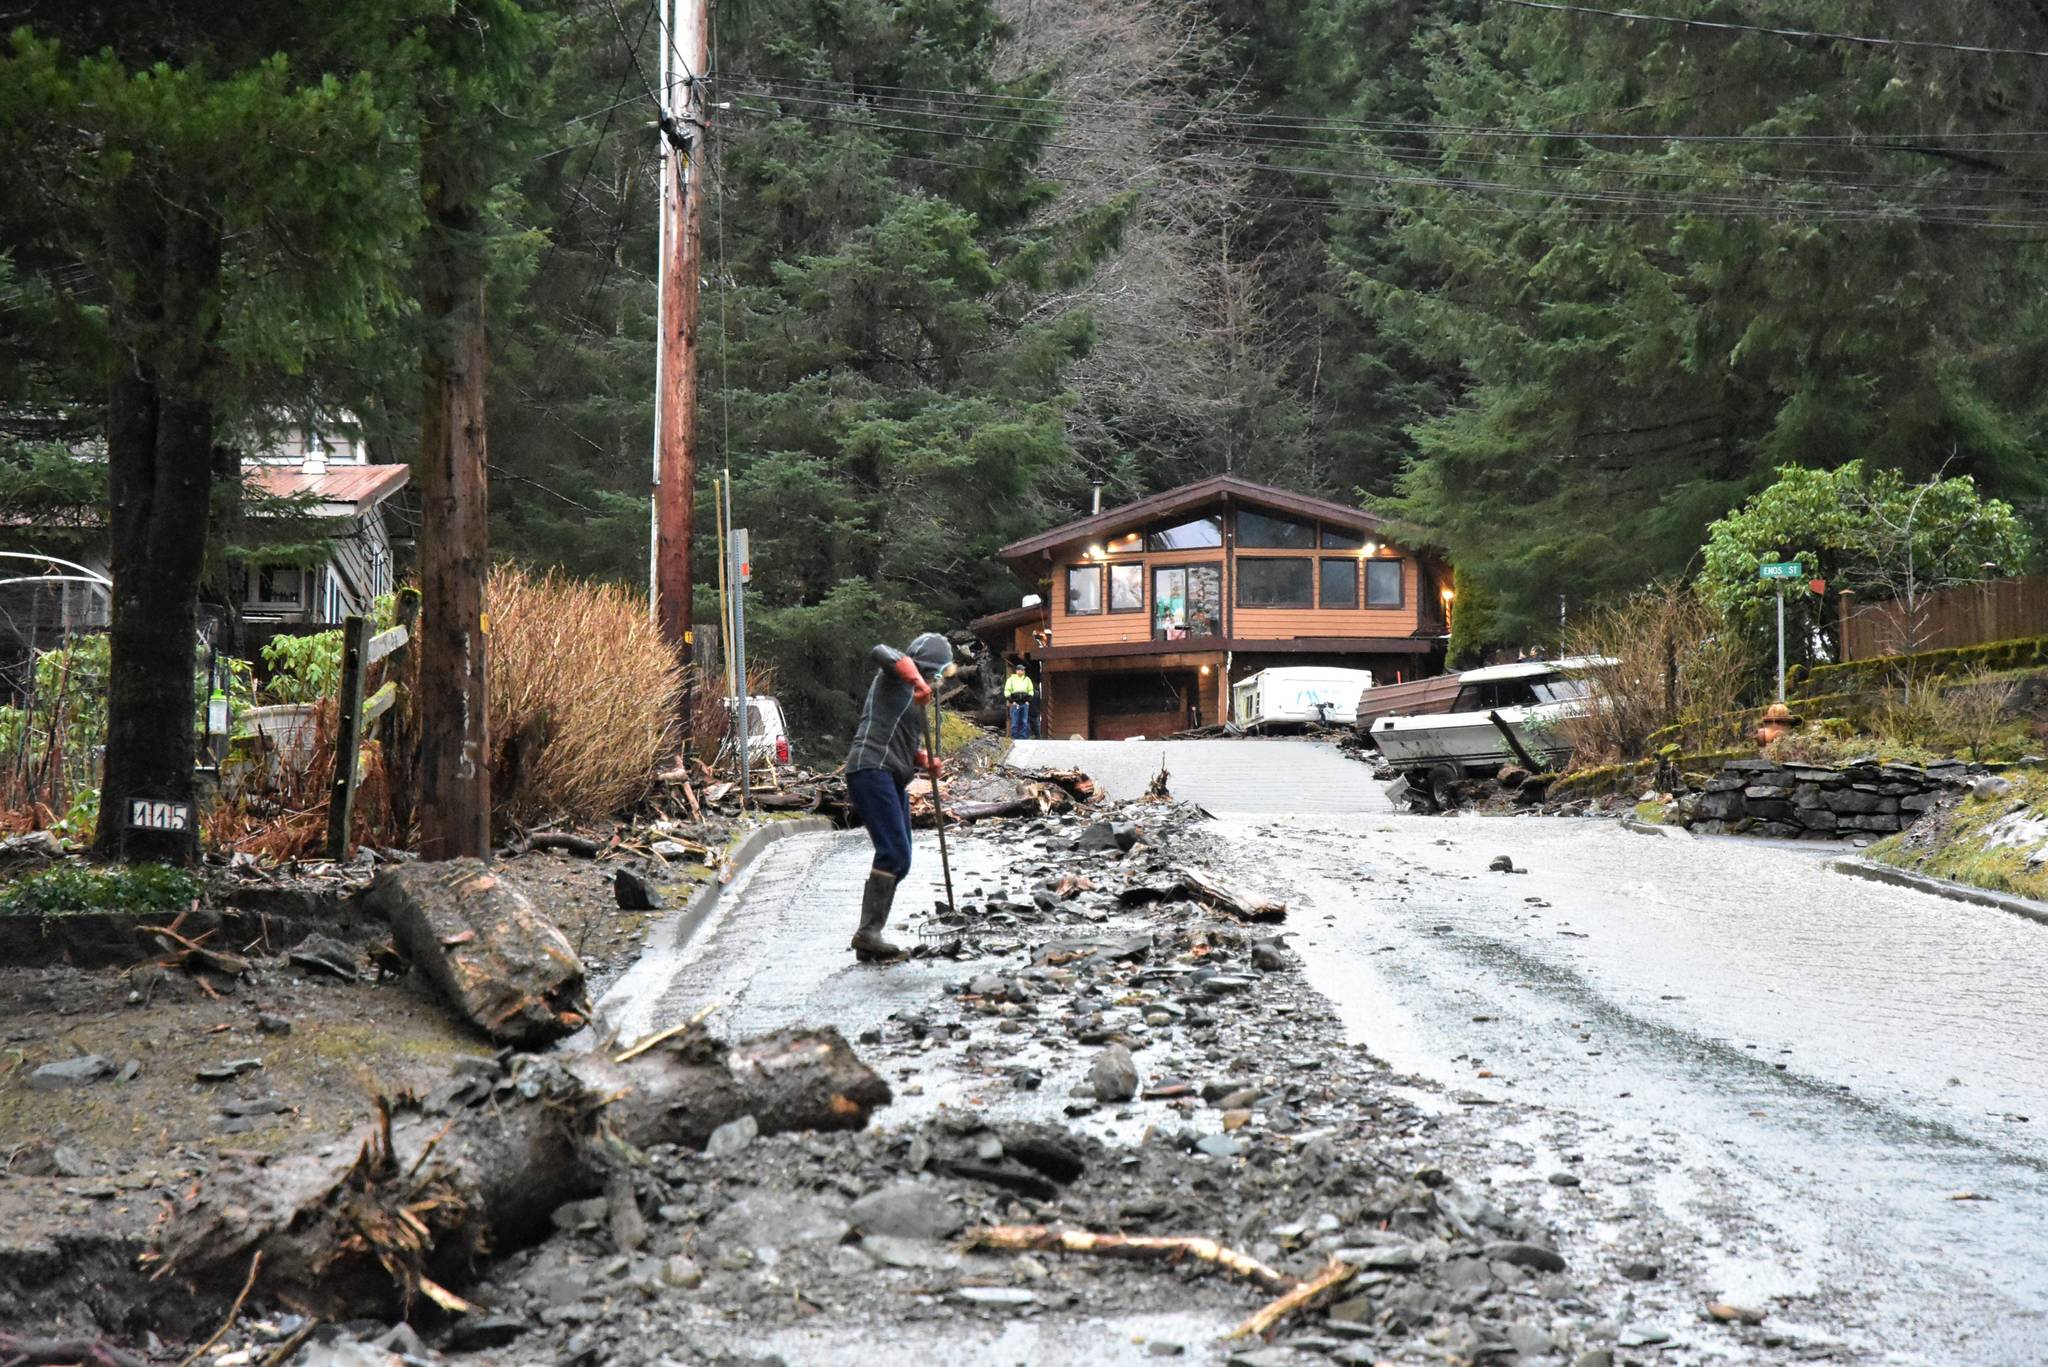 Residents on Wire Street near Twin Lakes clean up debris from a landslide caused by heavy rains on Dec. 2, 2020. The state of Alaska has set up a website to help people apply for state and federal relief money for damages caused by the storm. (Peter Segall / Juneau Empire file)